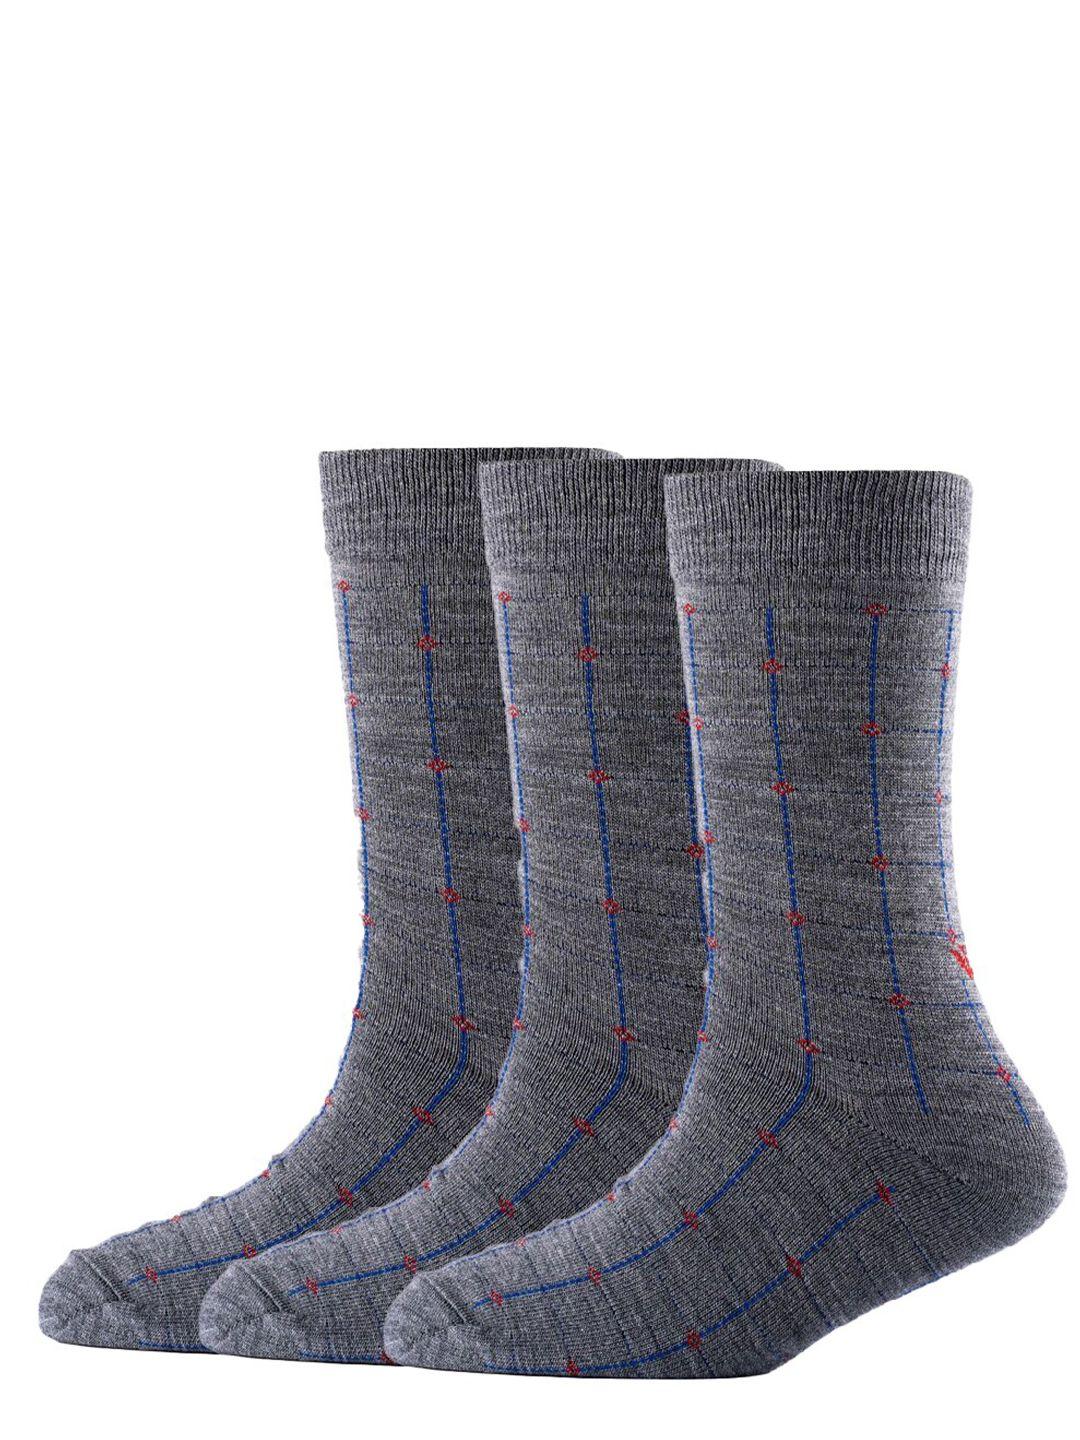 cotstyle-men-pack-of-3-patterned-pure-wool-calf-length-socks